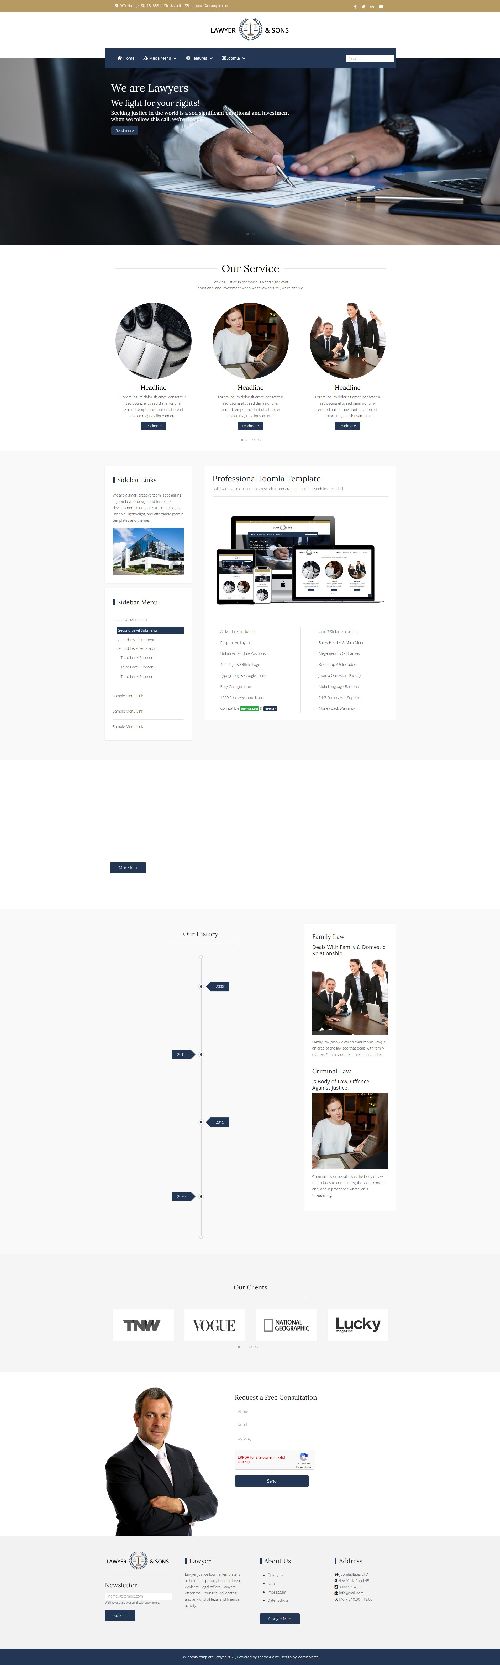 Lawyer - Law Firms and Lawyers Websites Joomla Template